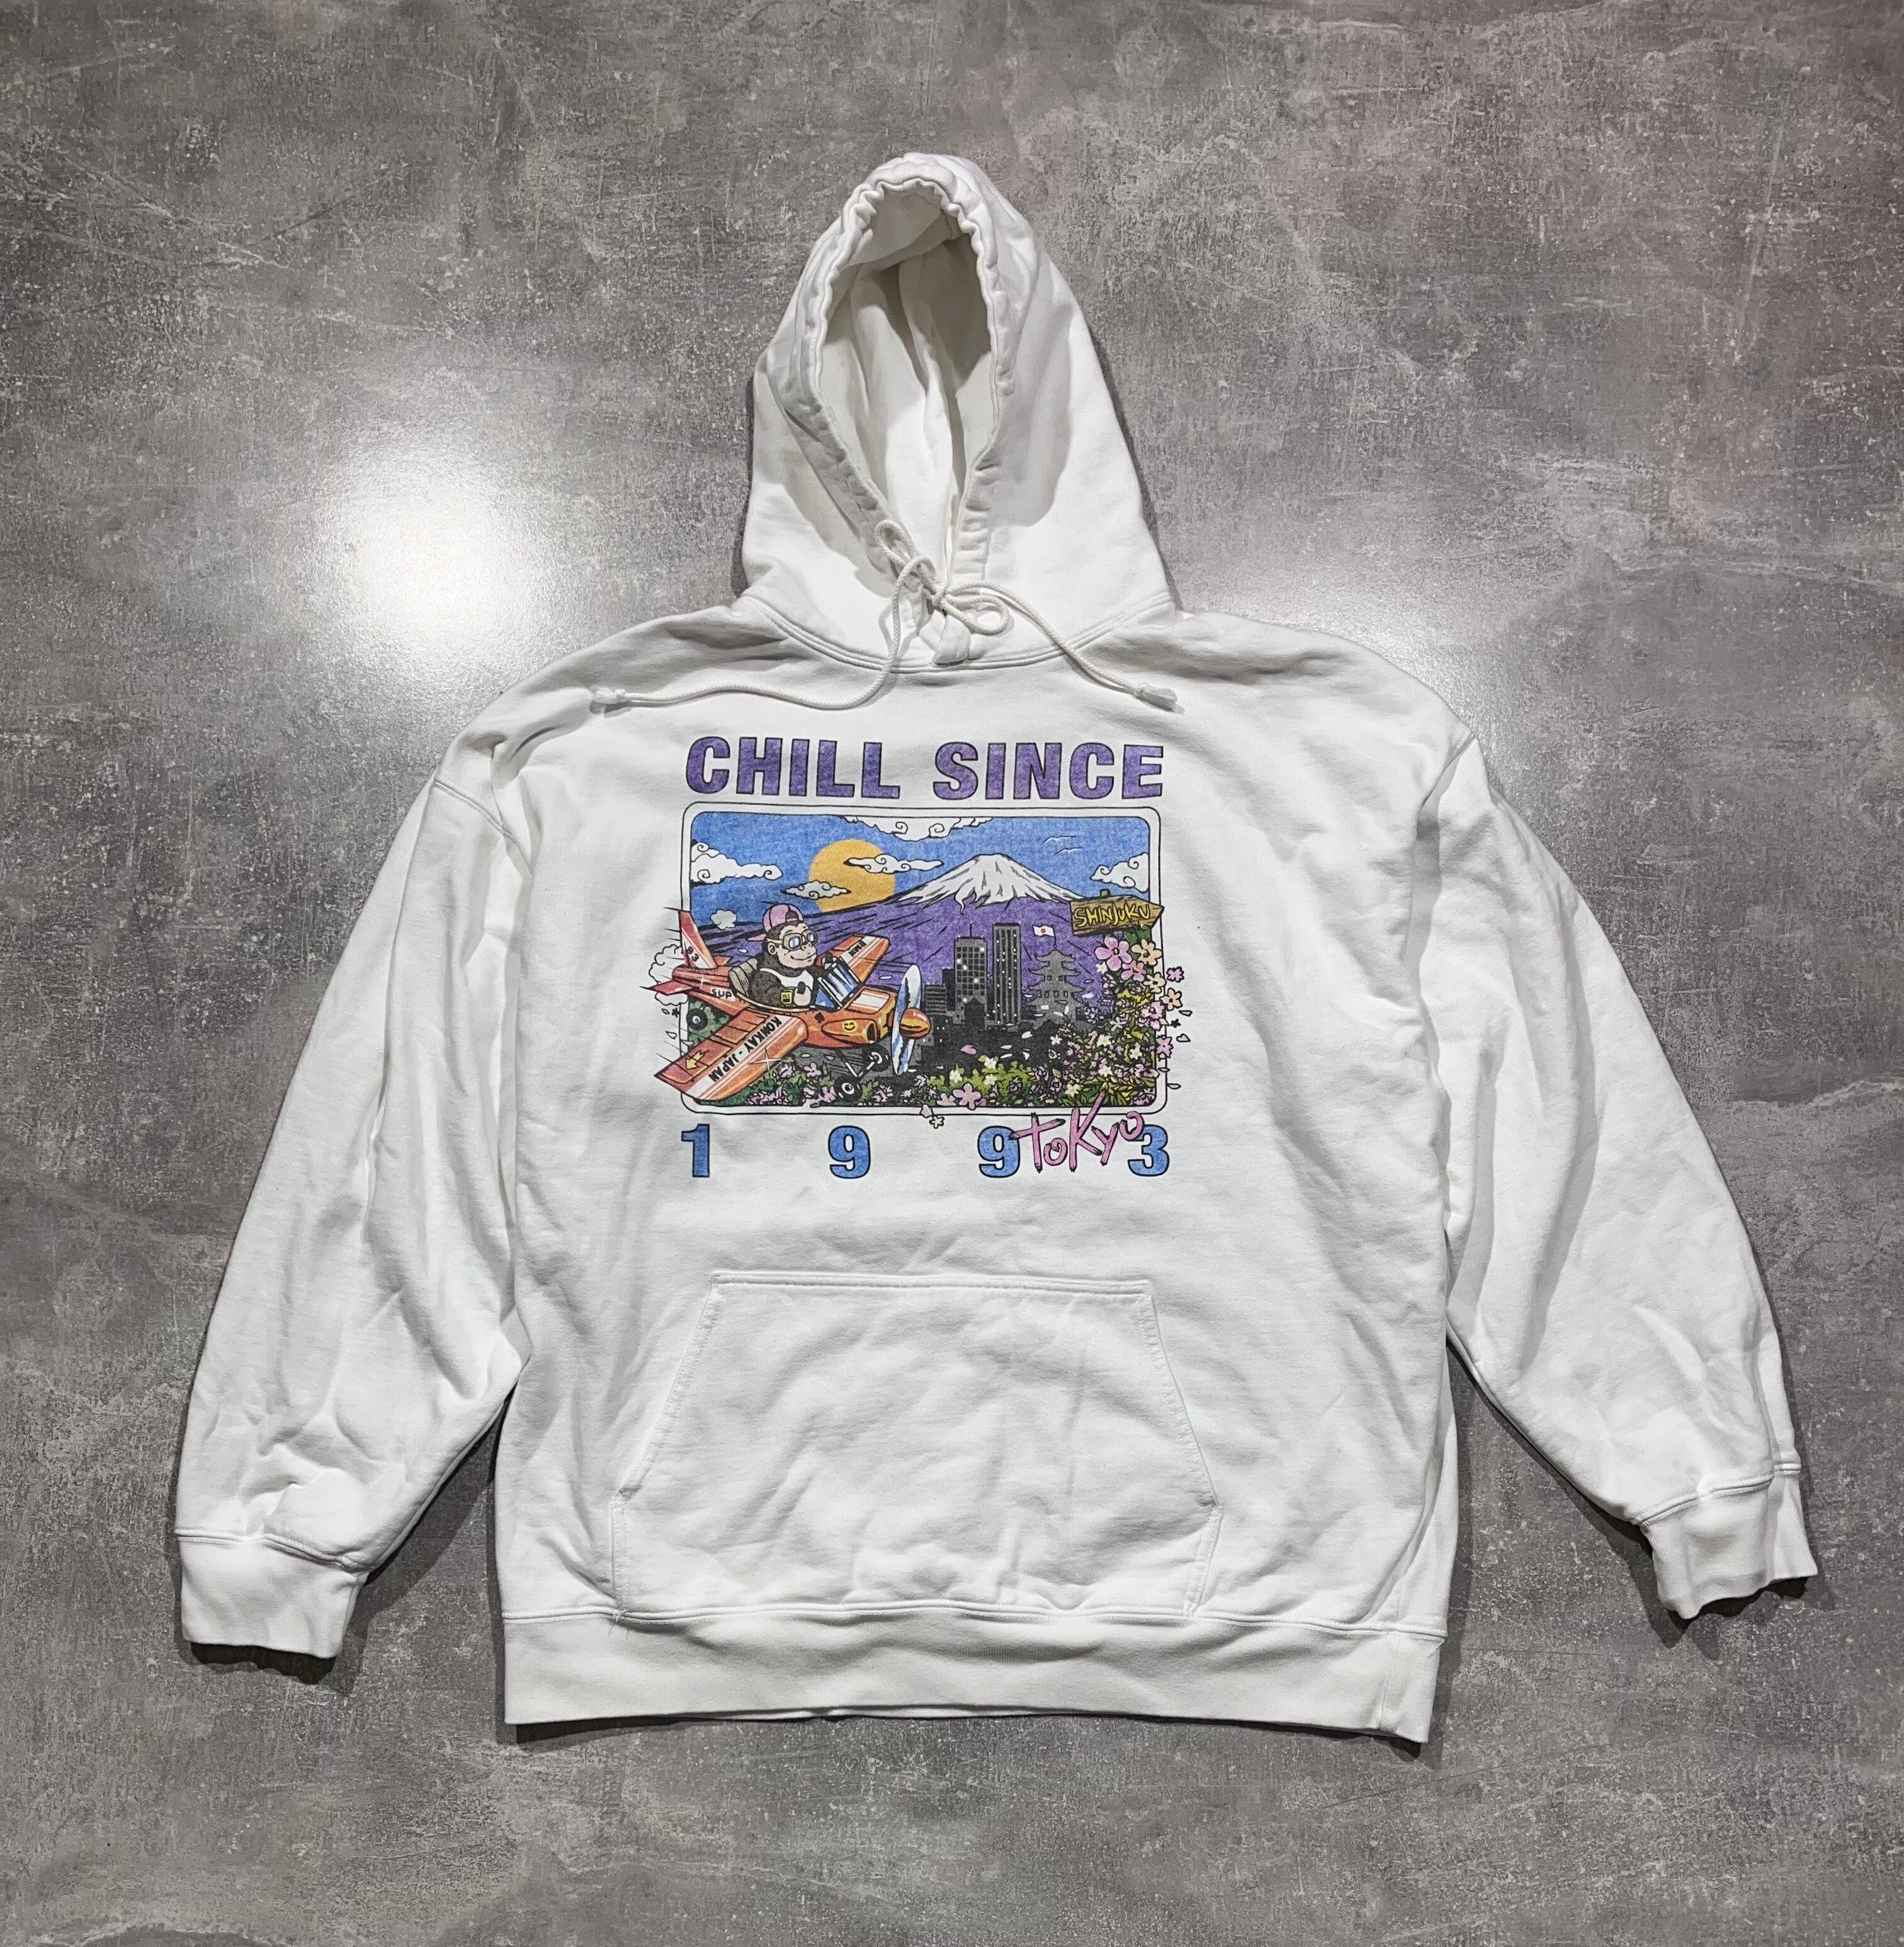 Pre-owned Humor X Vintage Humor Chill Since Oversized Y2k Japan Style In White